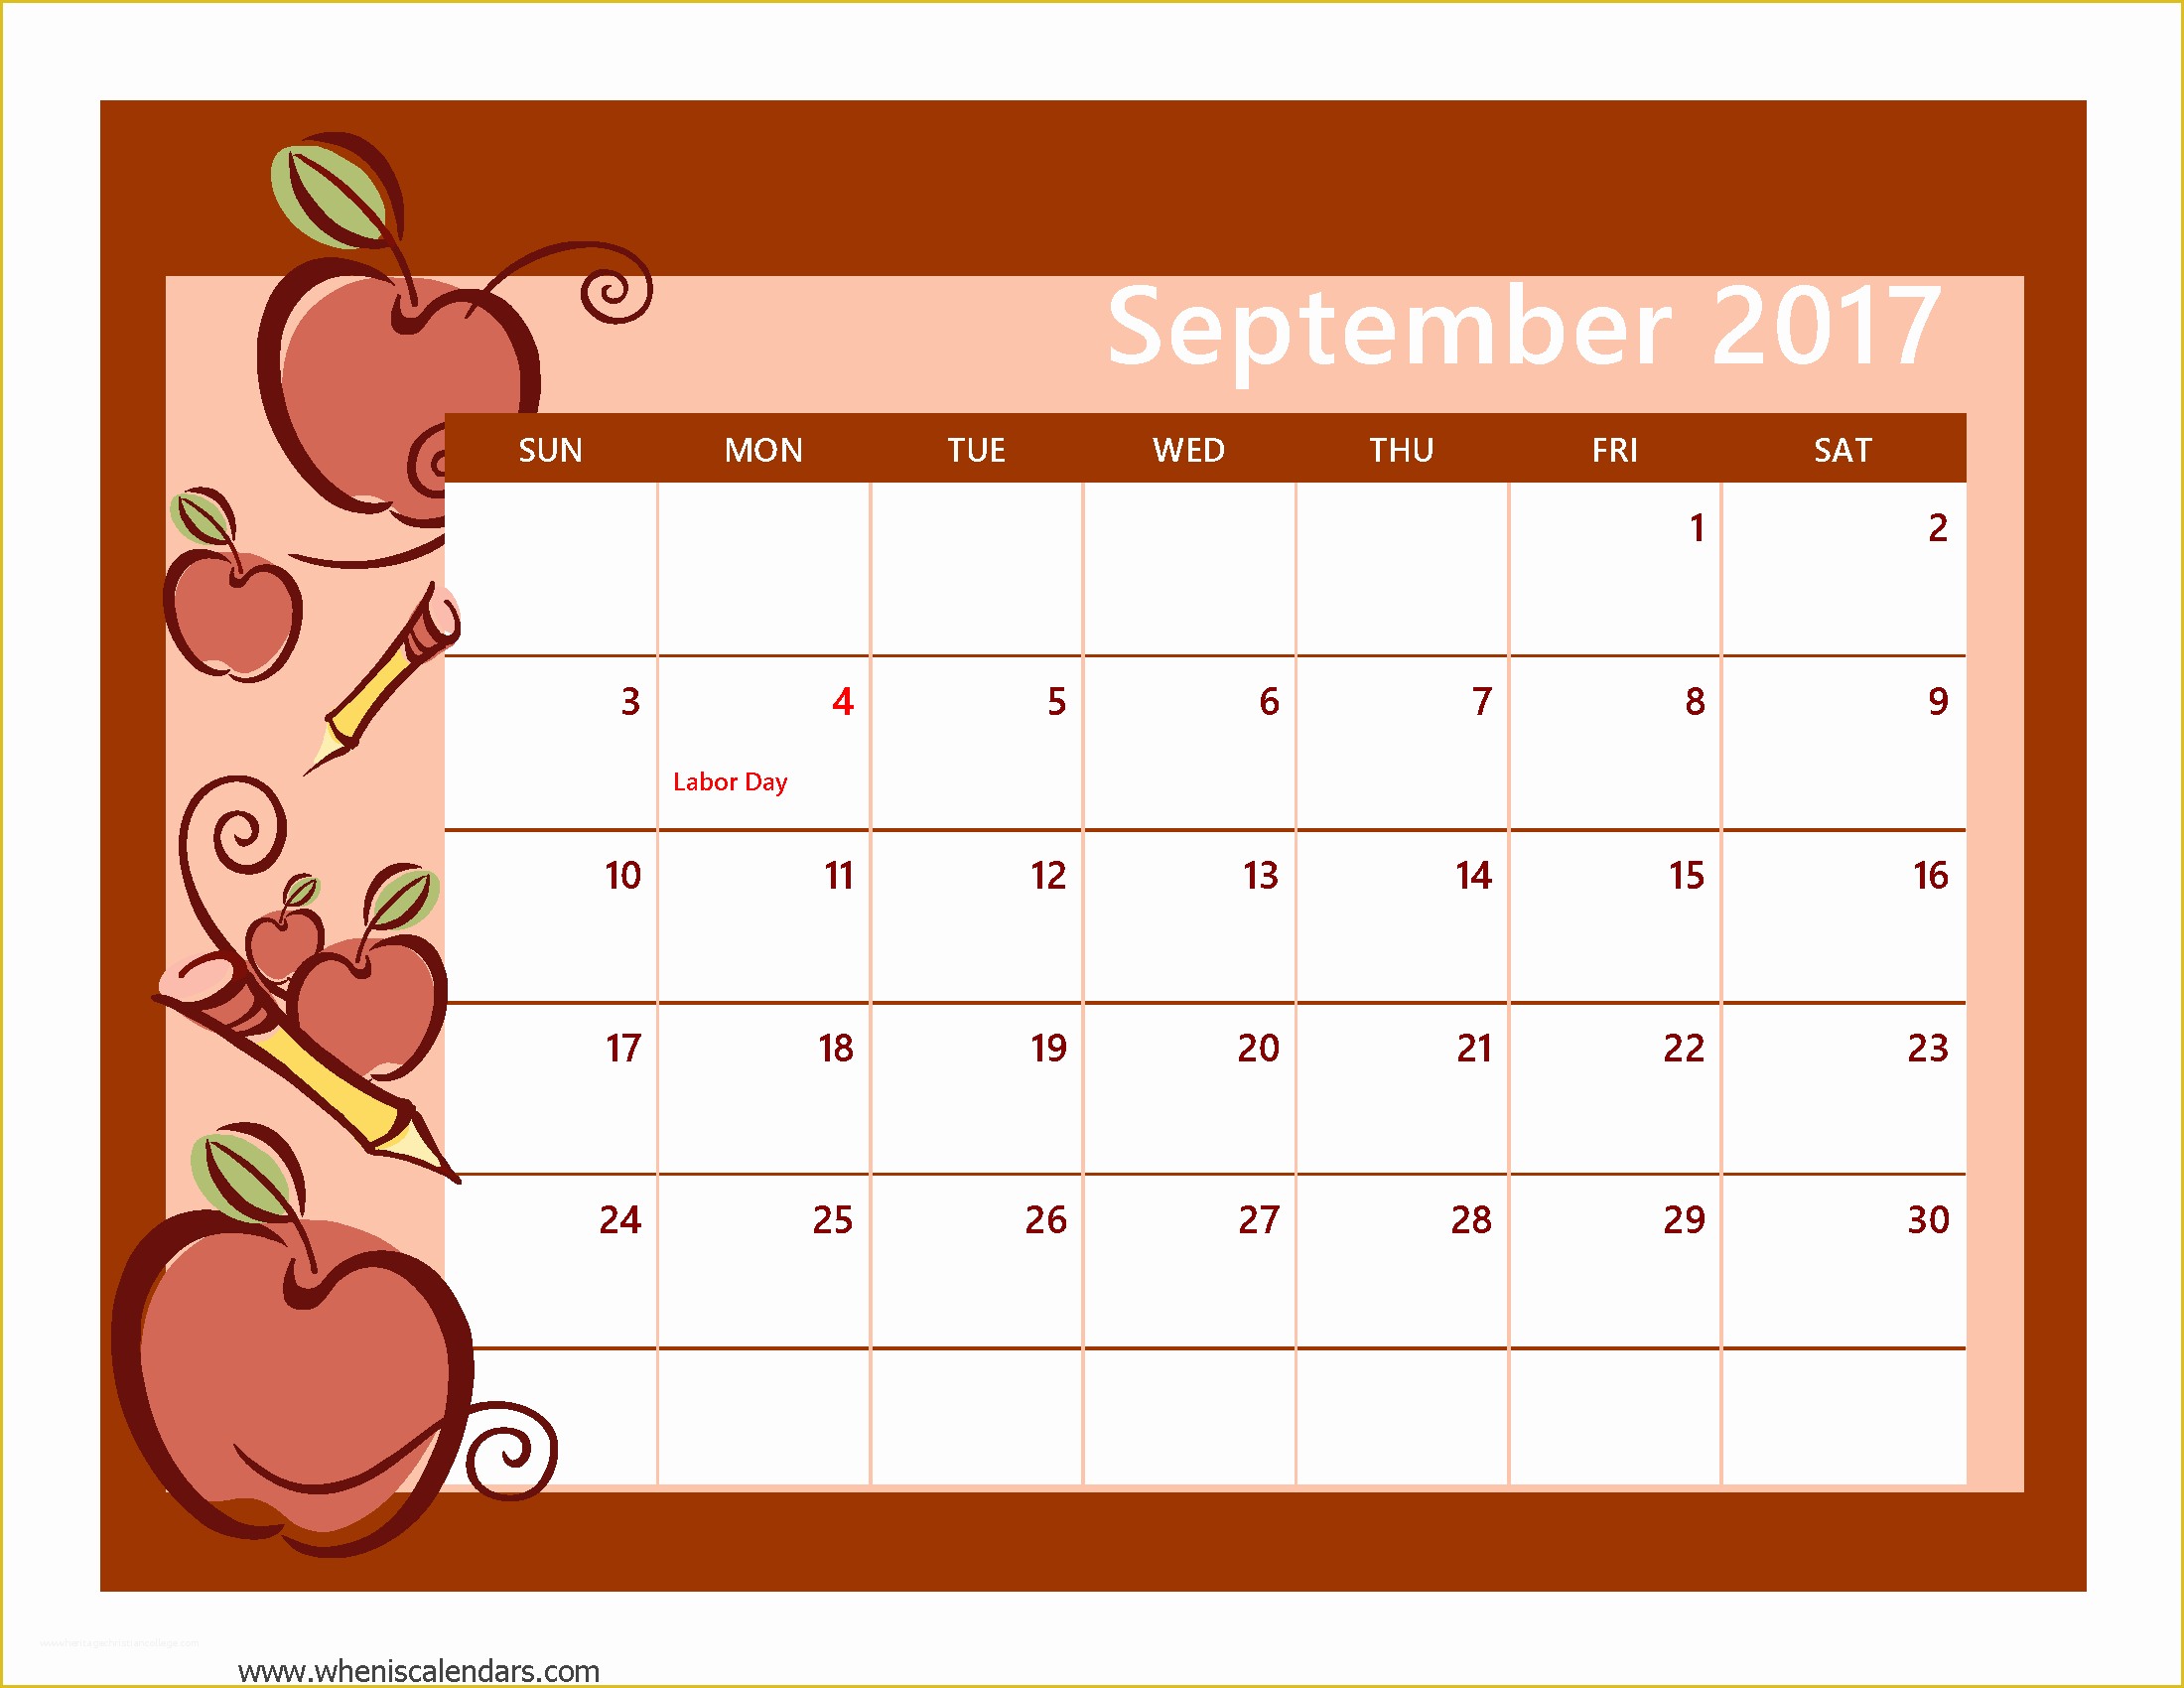 Holiday Schedule Template Free Of September 2017 Calendar with Holidays